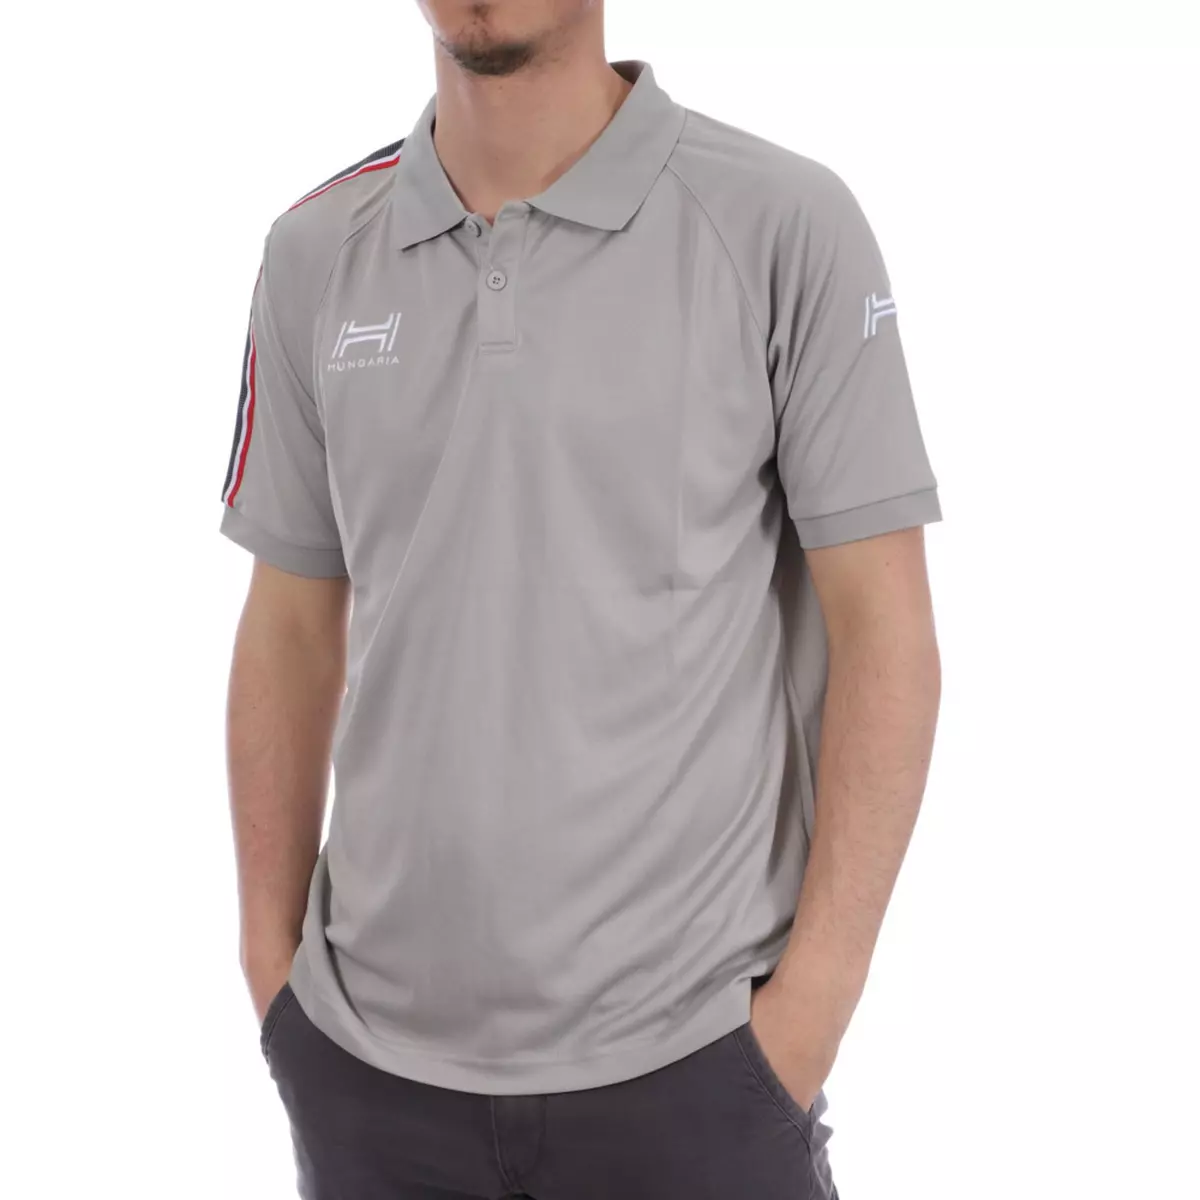 HUNGARIA Polo gris bandes rouge/noir homme Hungaria Training pro